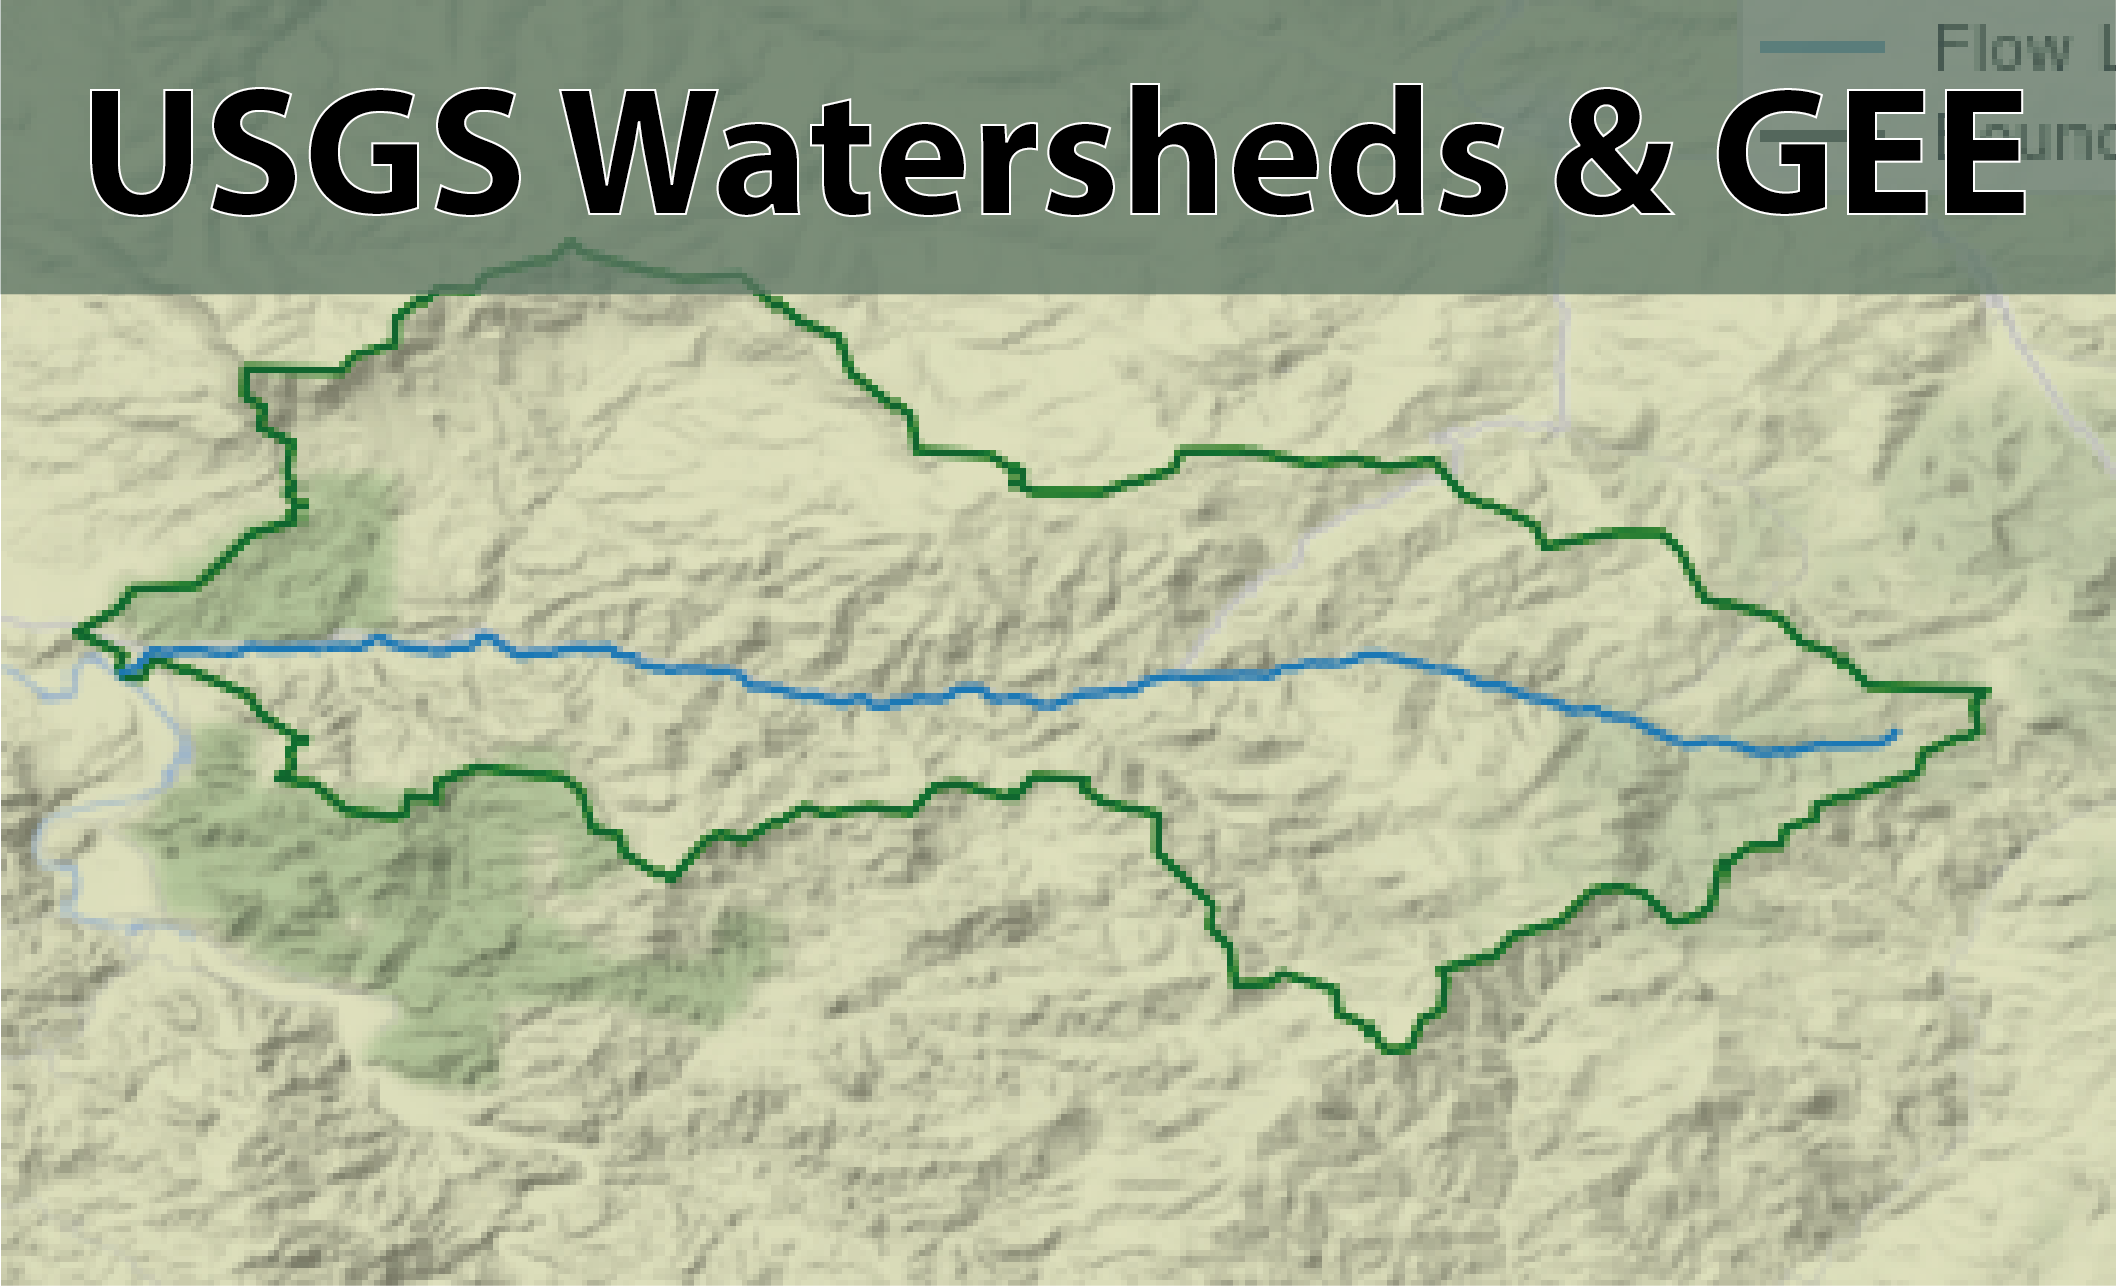 Map of watershed outline with words watershed analyses and GEE as title